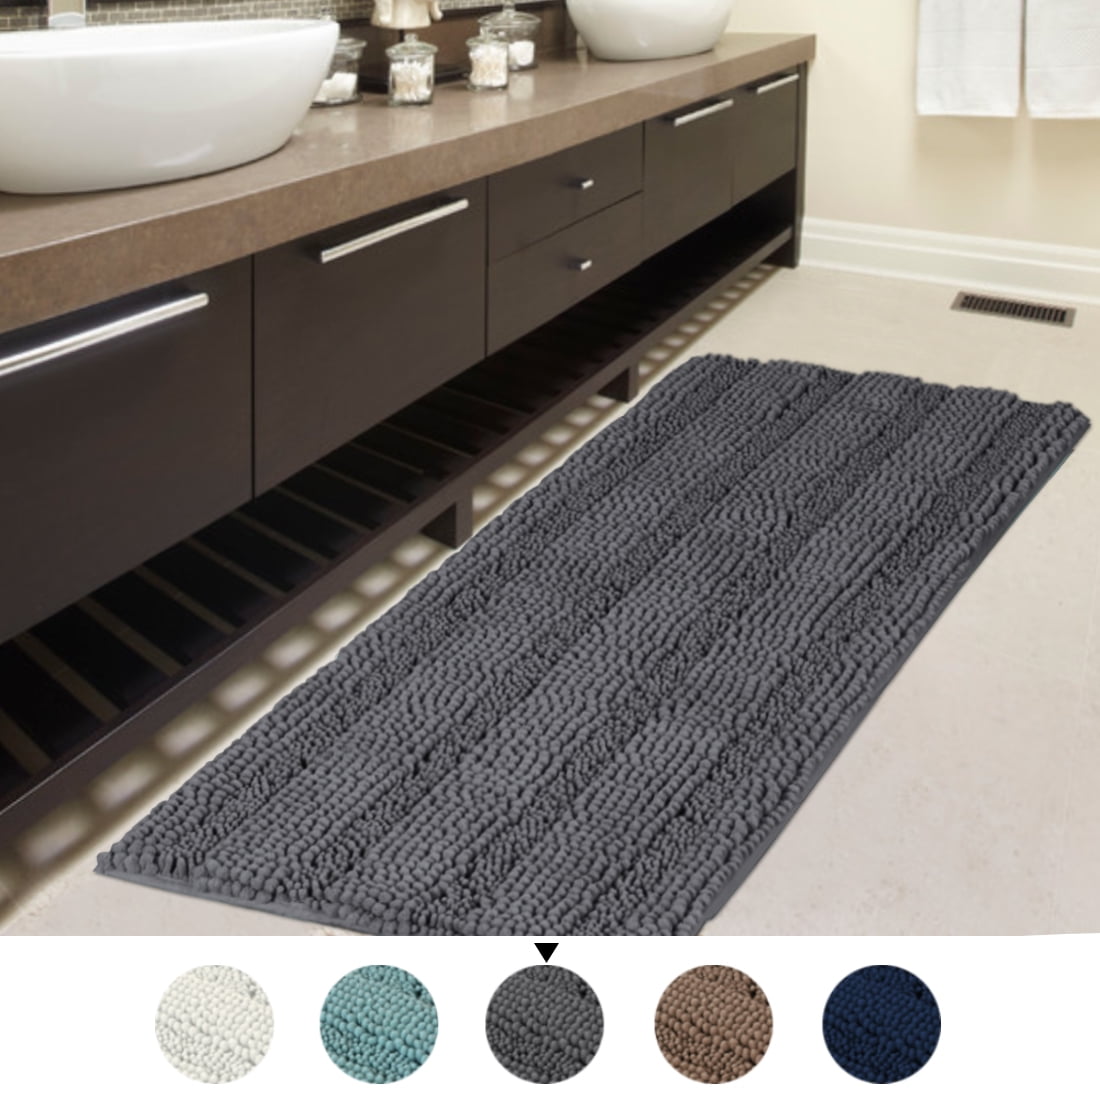 Non Slip Bath Mat Soft Thick Large Bathroom Area Rug Water Absorbent Shaggy Mats 